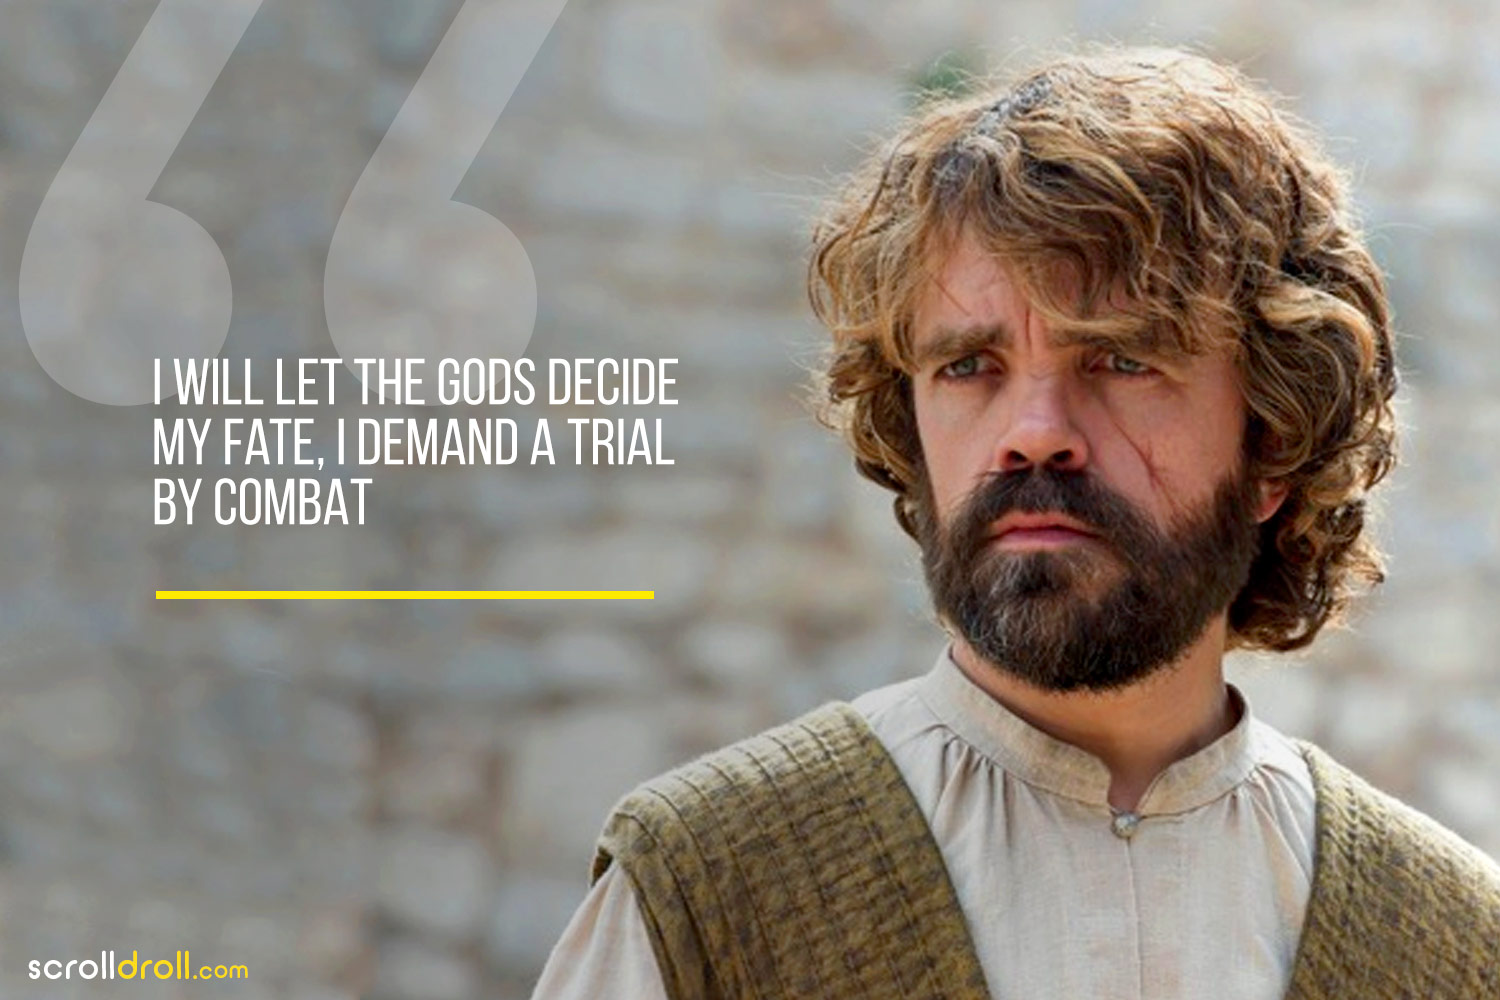 tyrion lannister quotes i have a tender spot in my heart